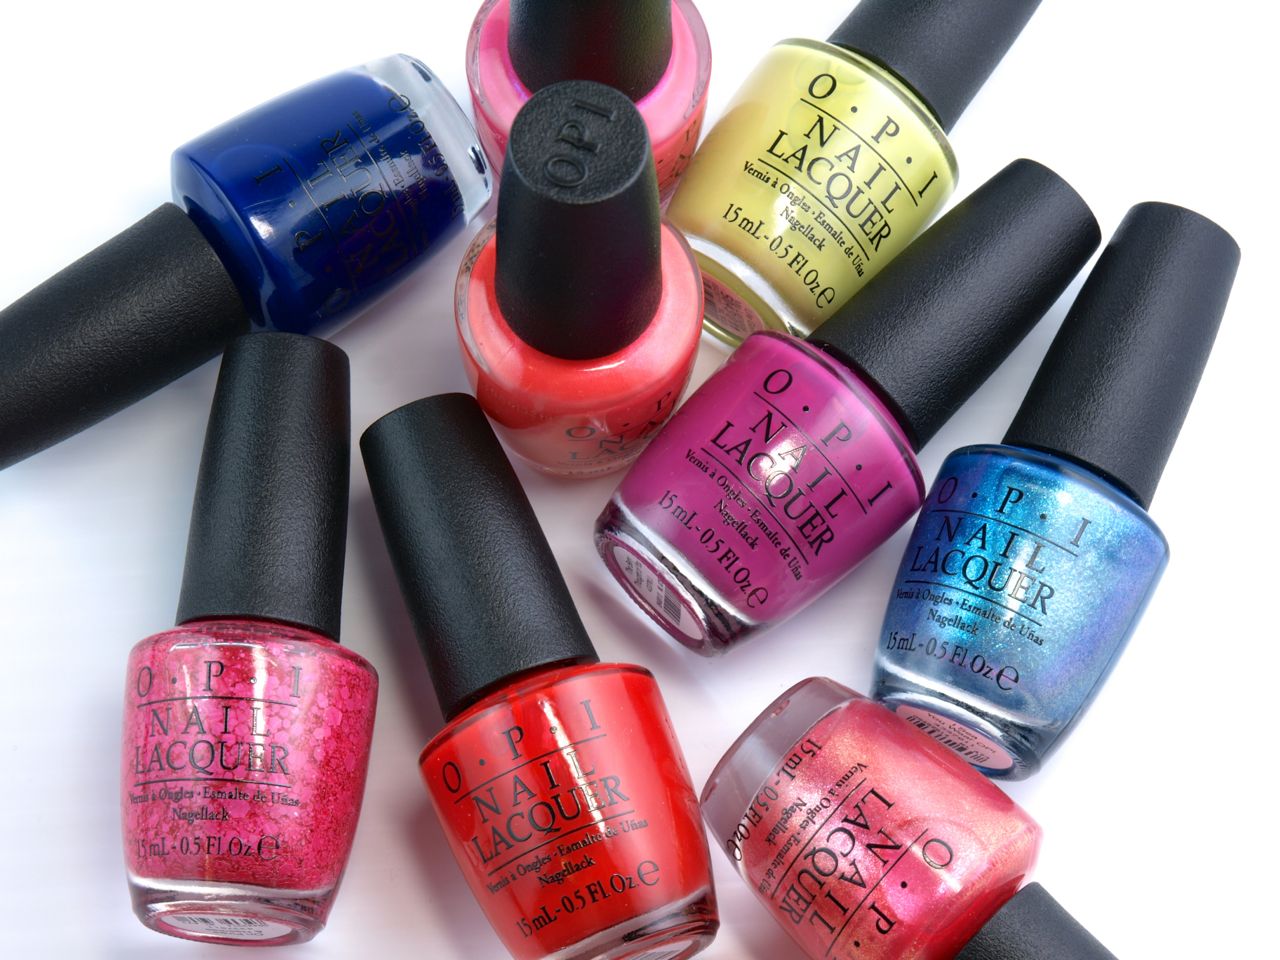 OPI Brights 2015 Summer Collection: Review and Swatches